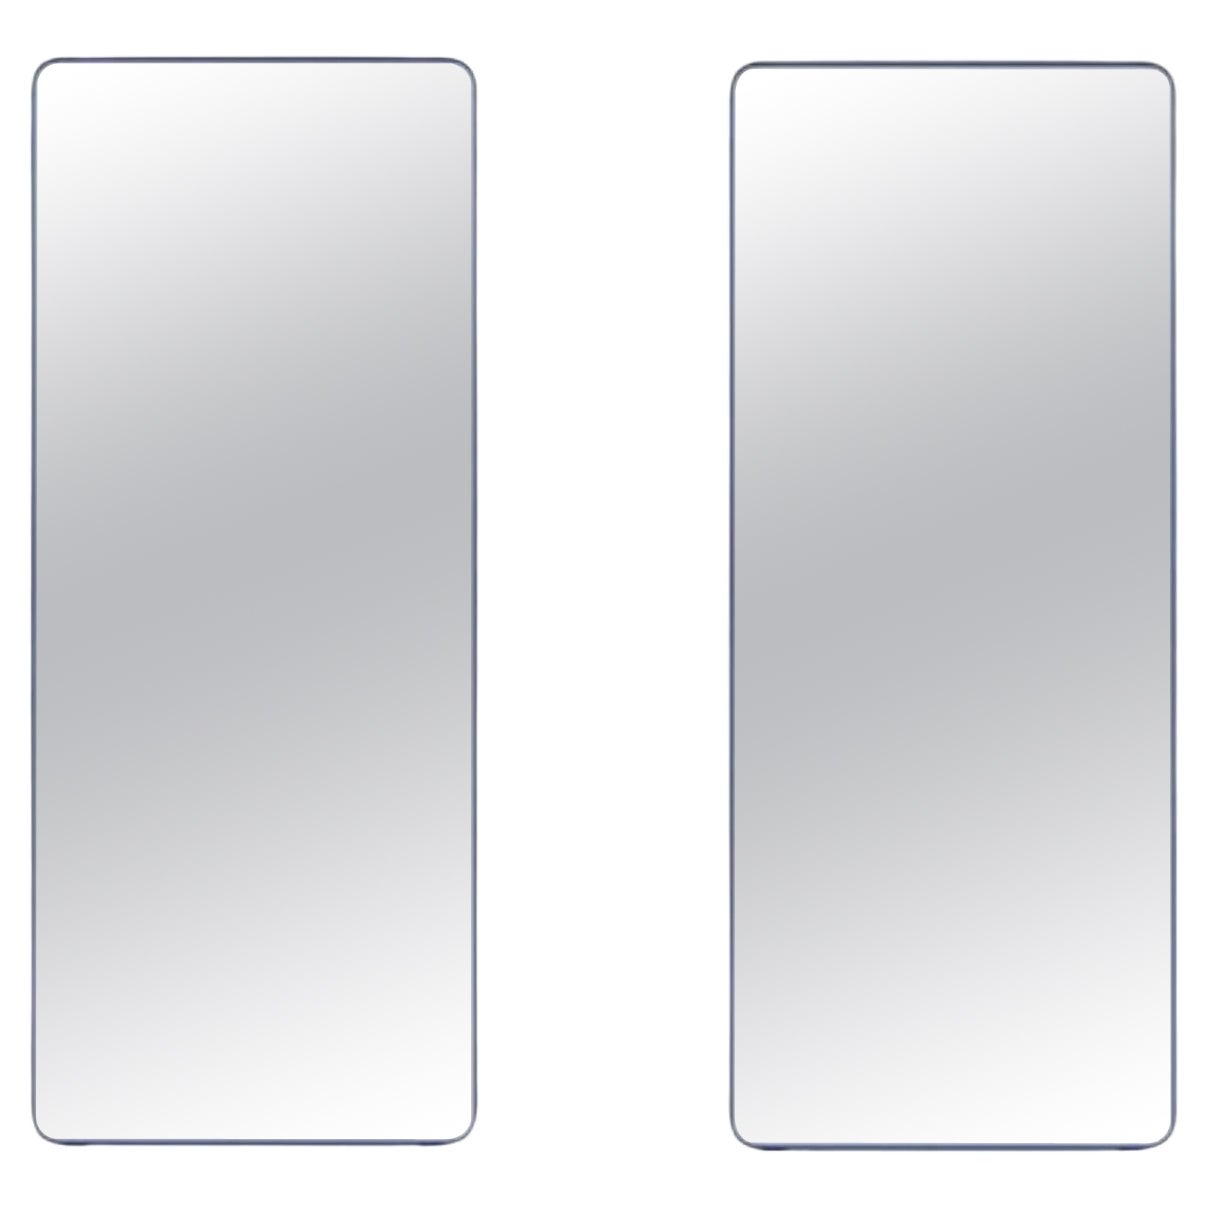 Set of 2 Loveself 05 Mirrors by Oito